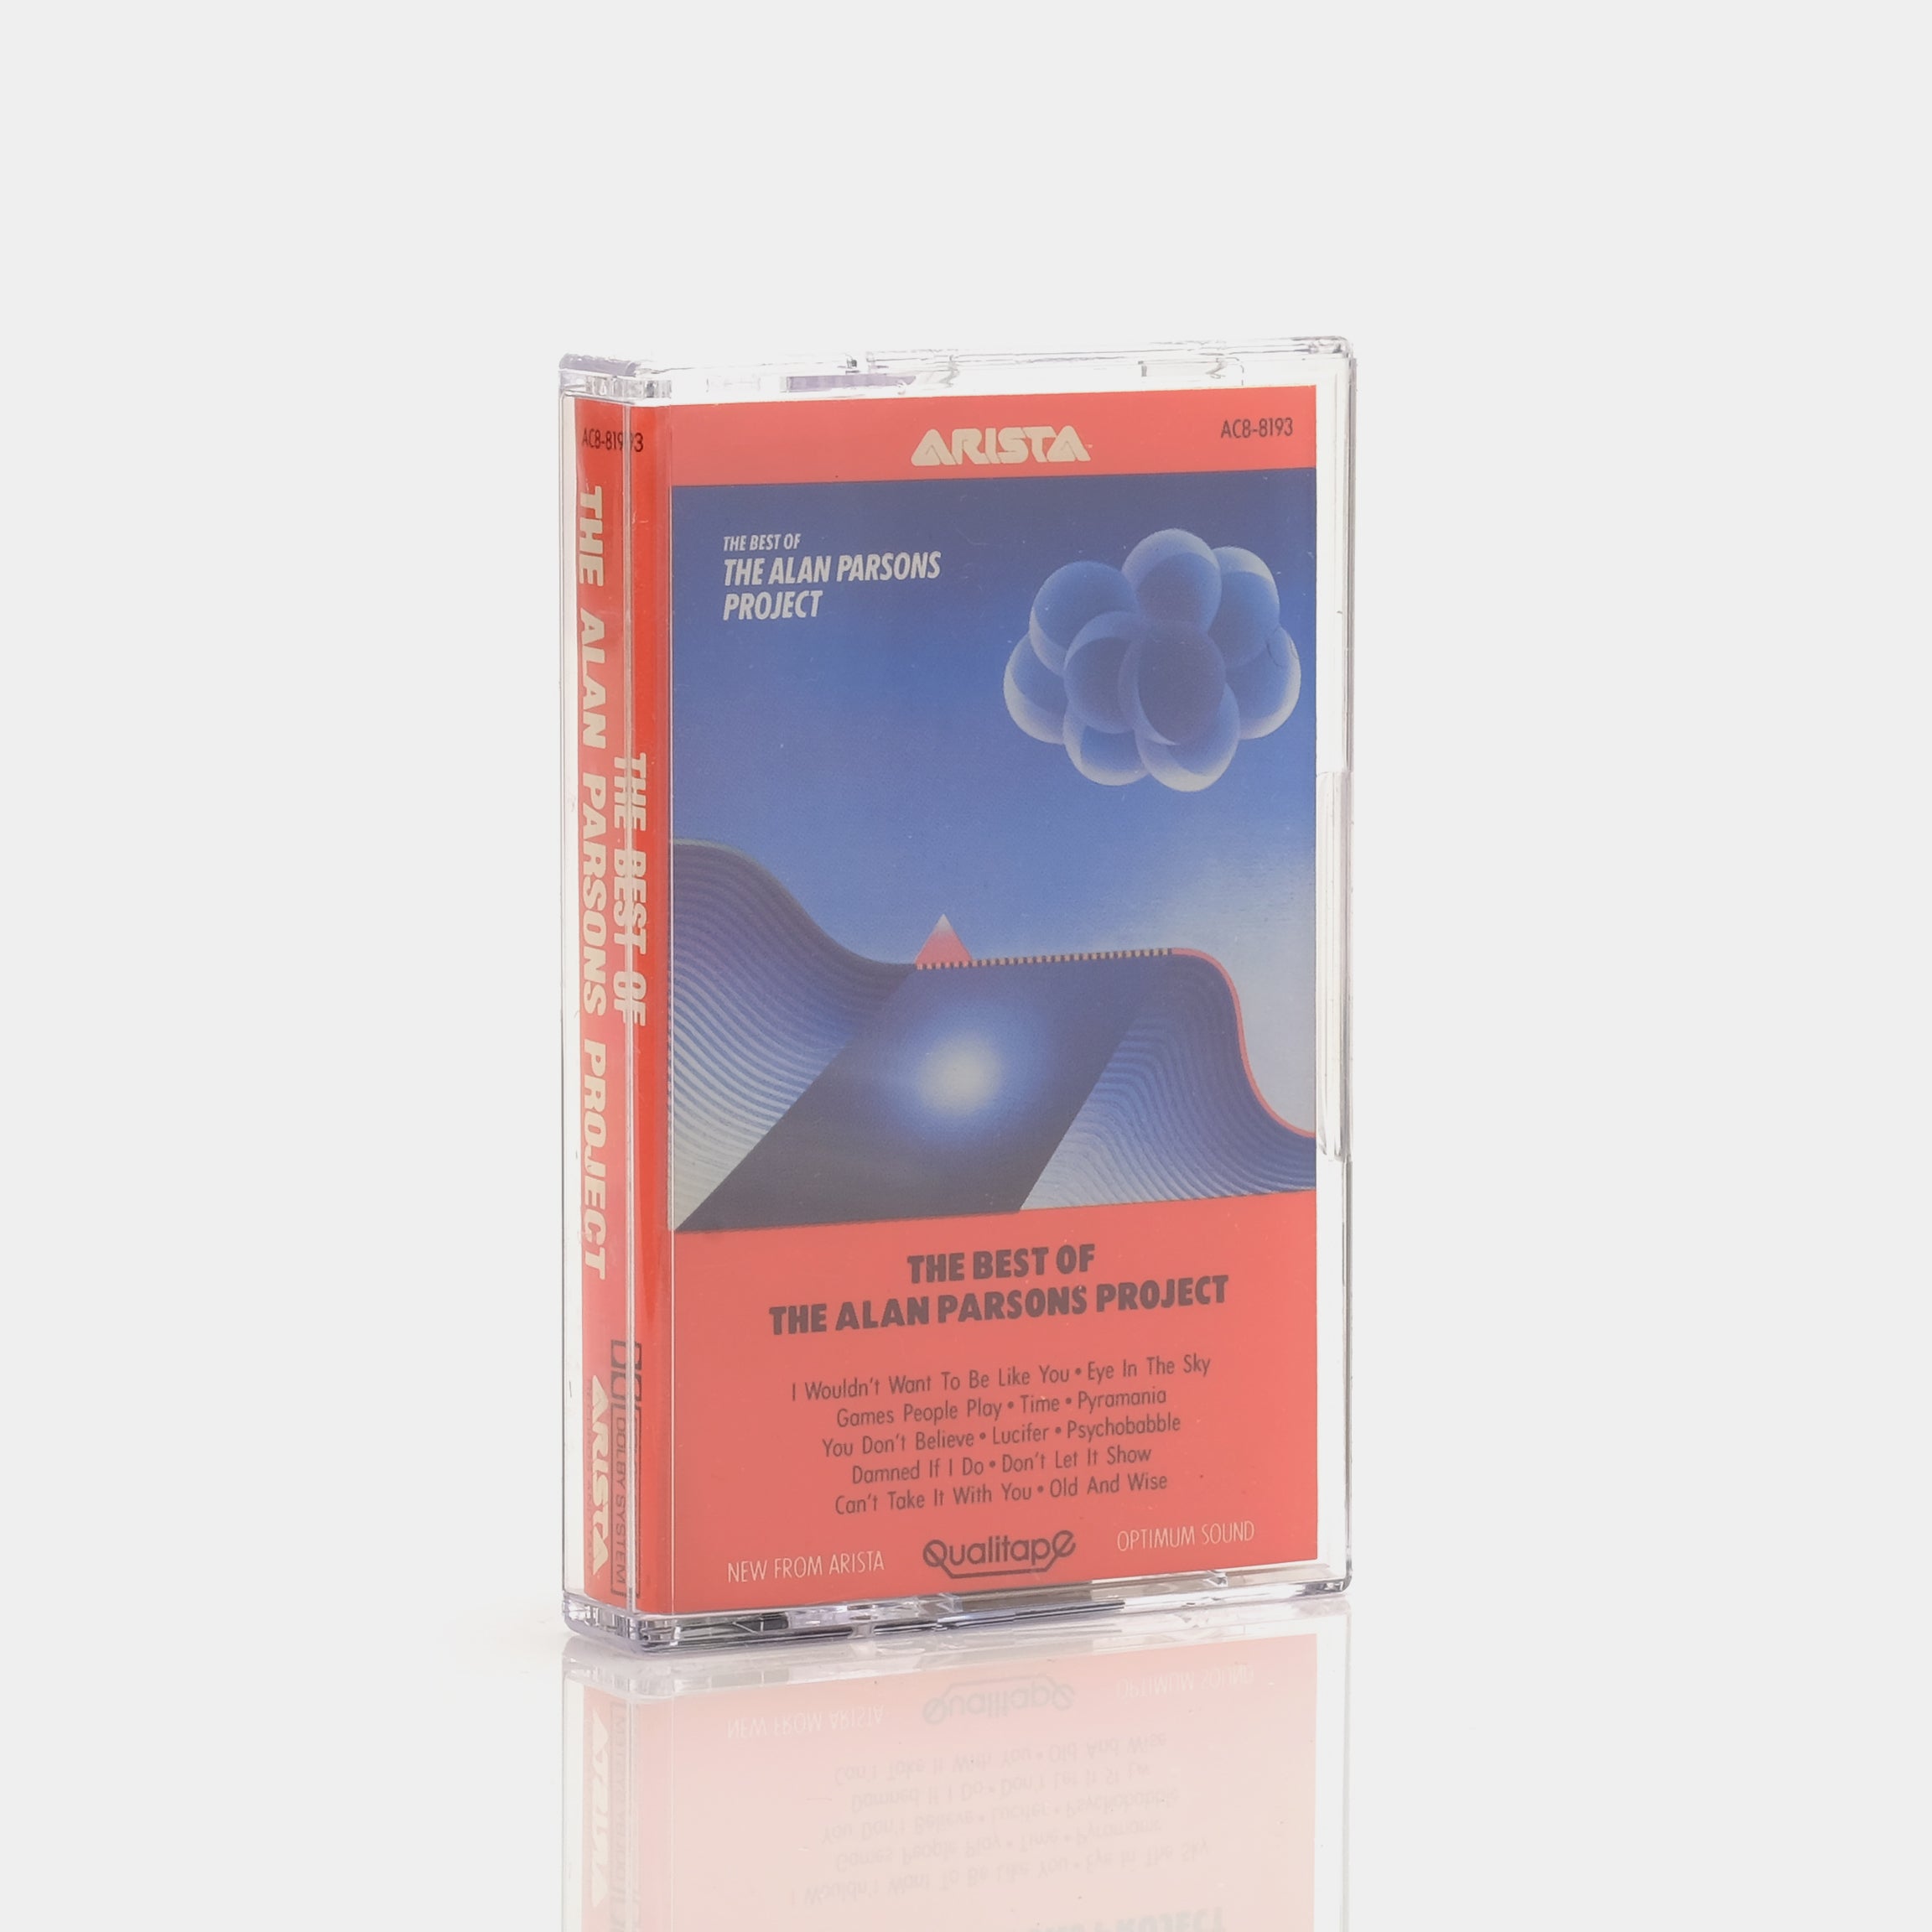 The Alan Parsons Project - The Best Of The Alan Parsons Project Cassette Tape